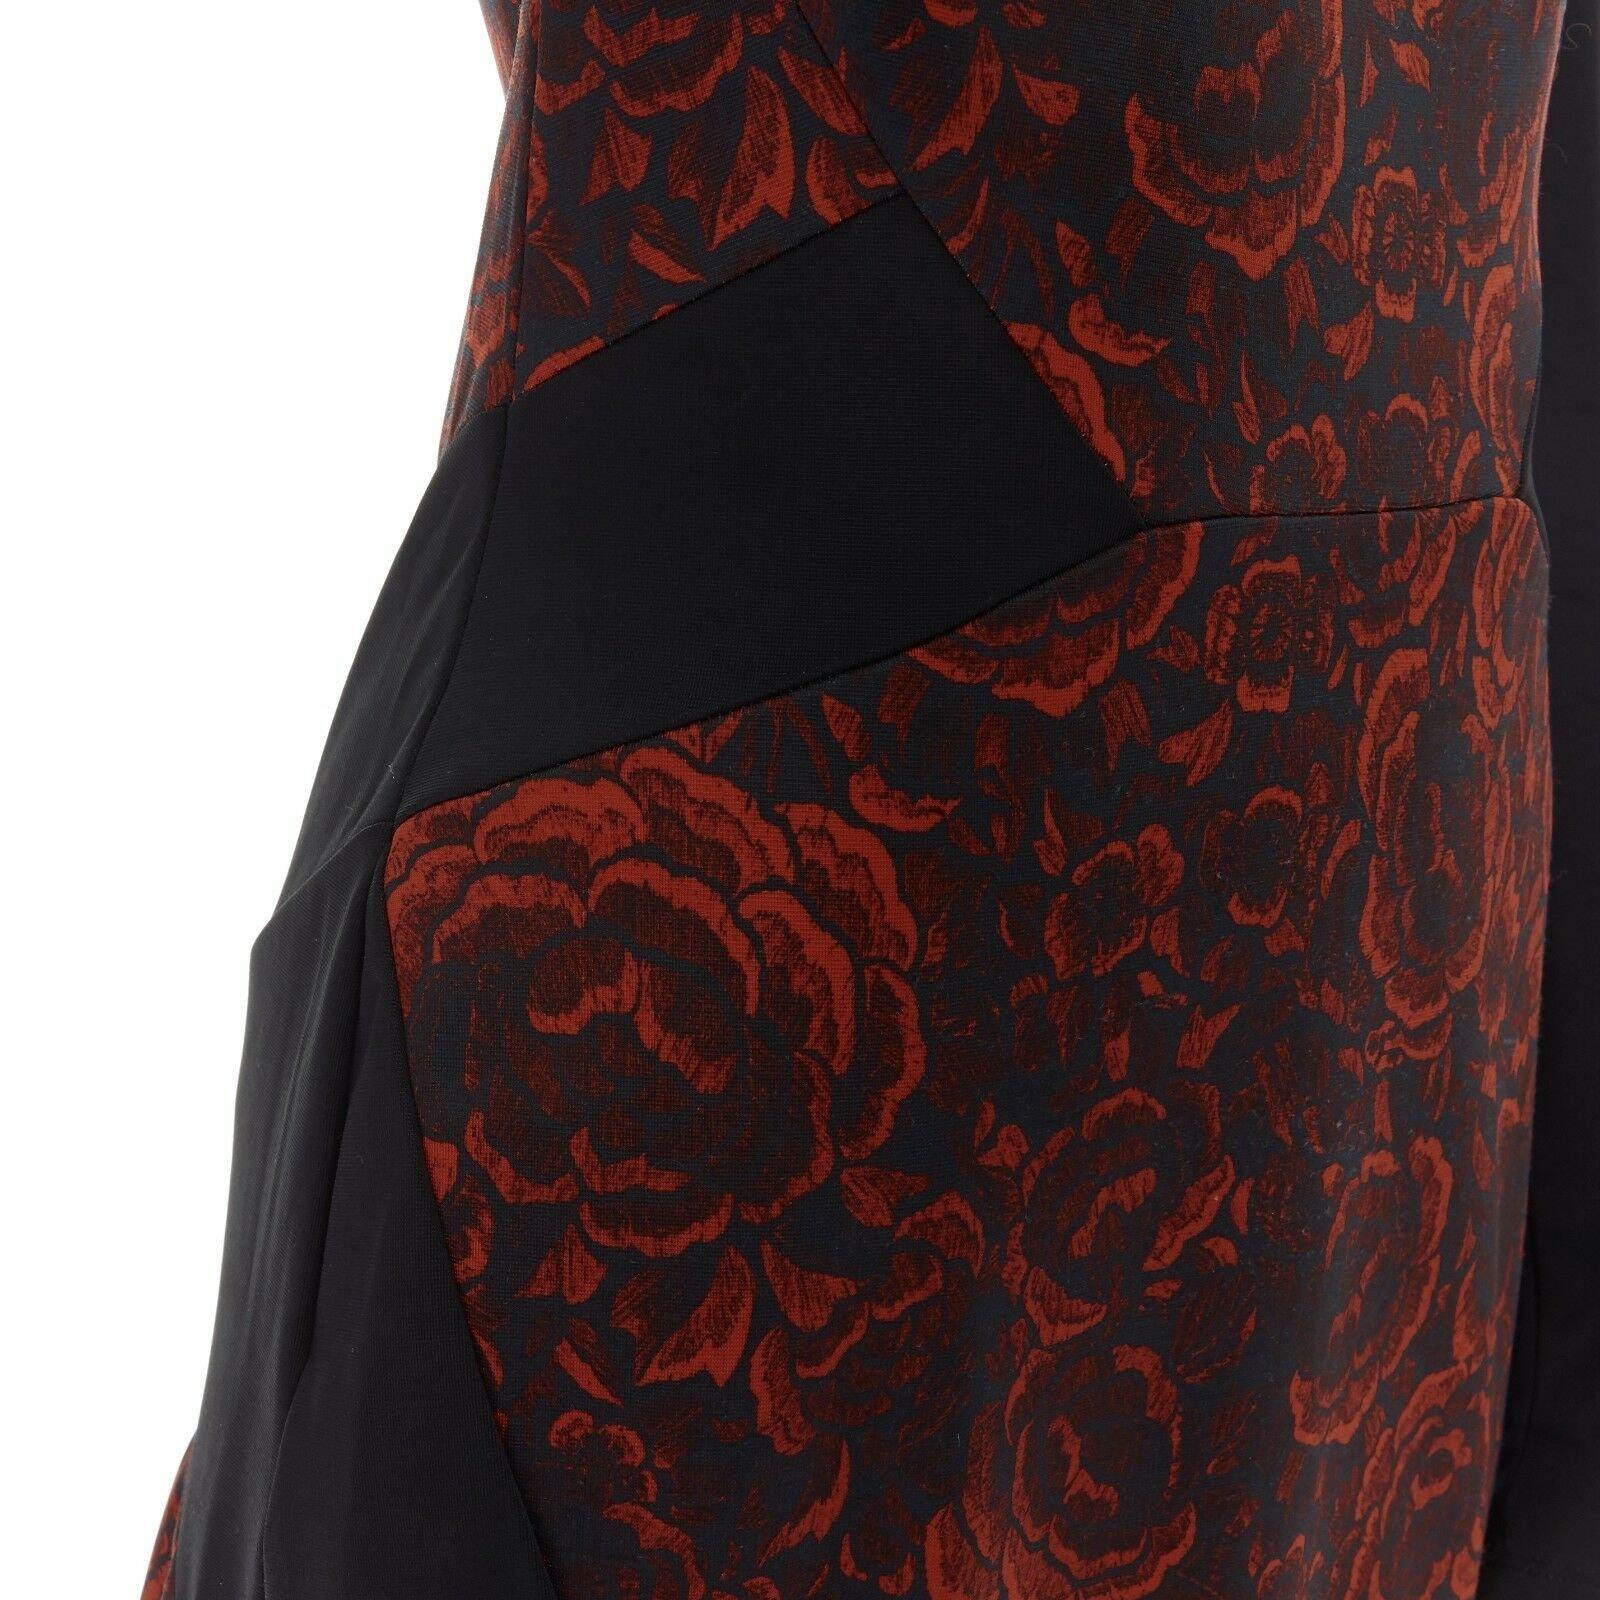 JUST CAVALLI red floral print black panelled dual slit bodycon cocktail dress S 3